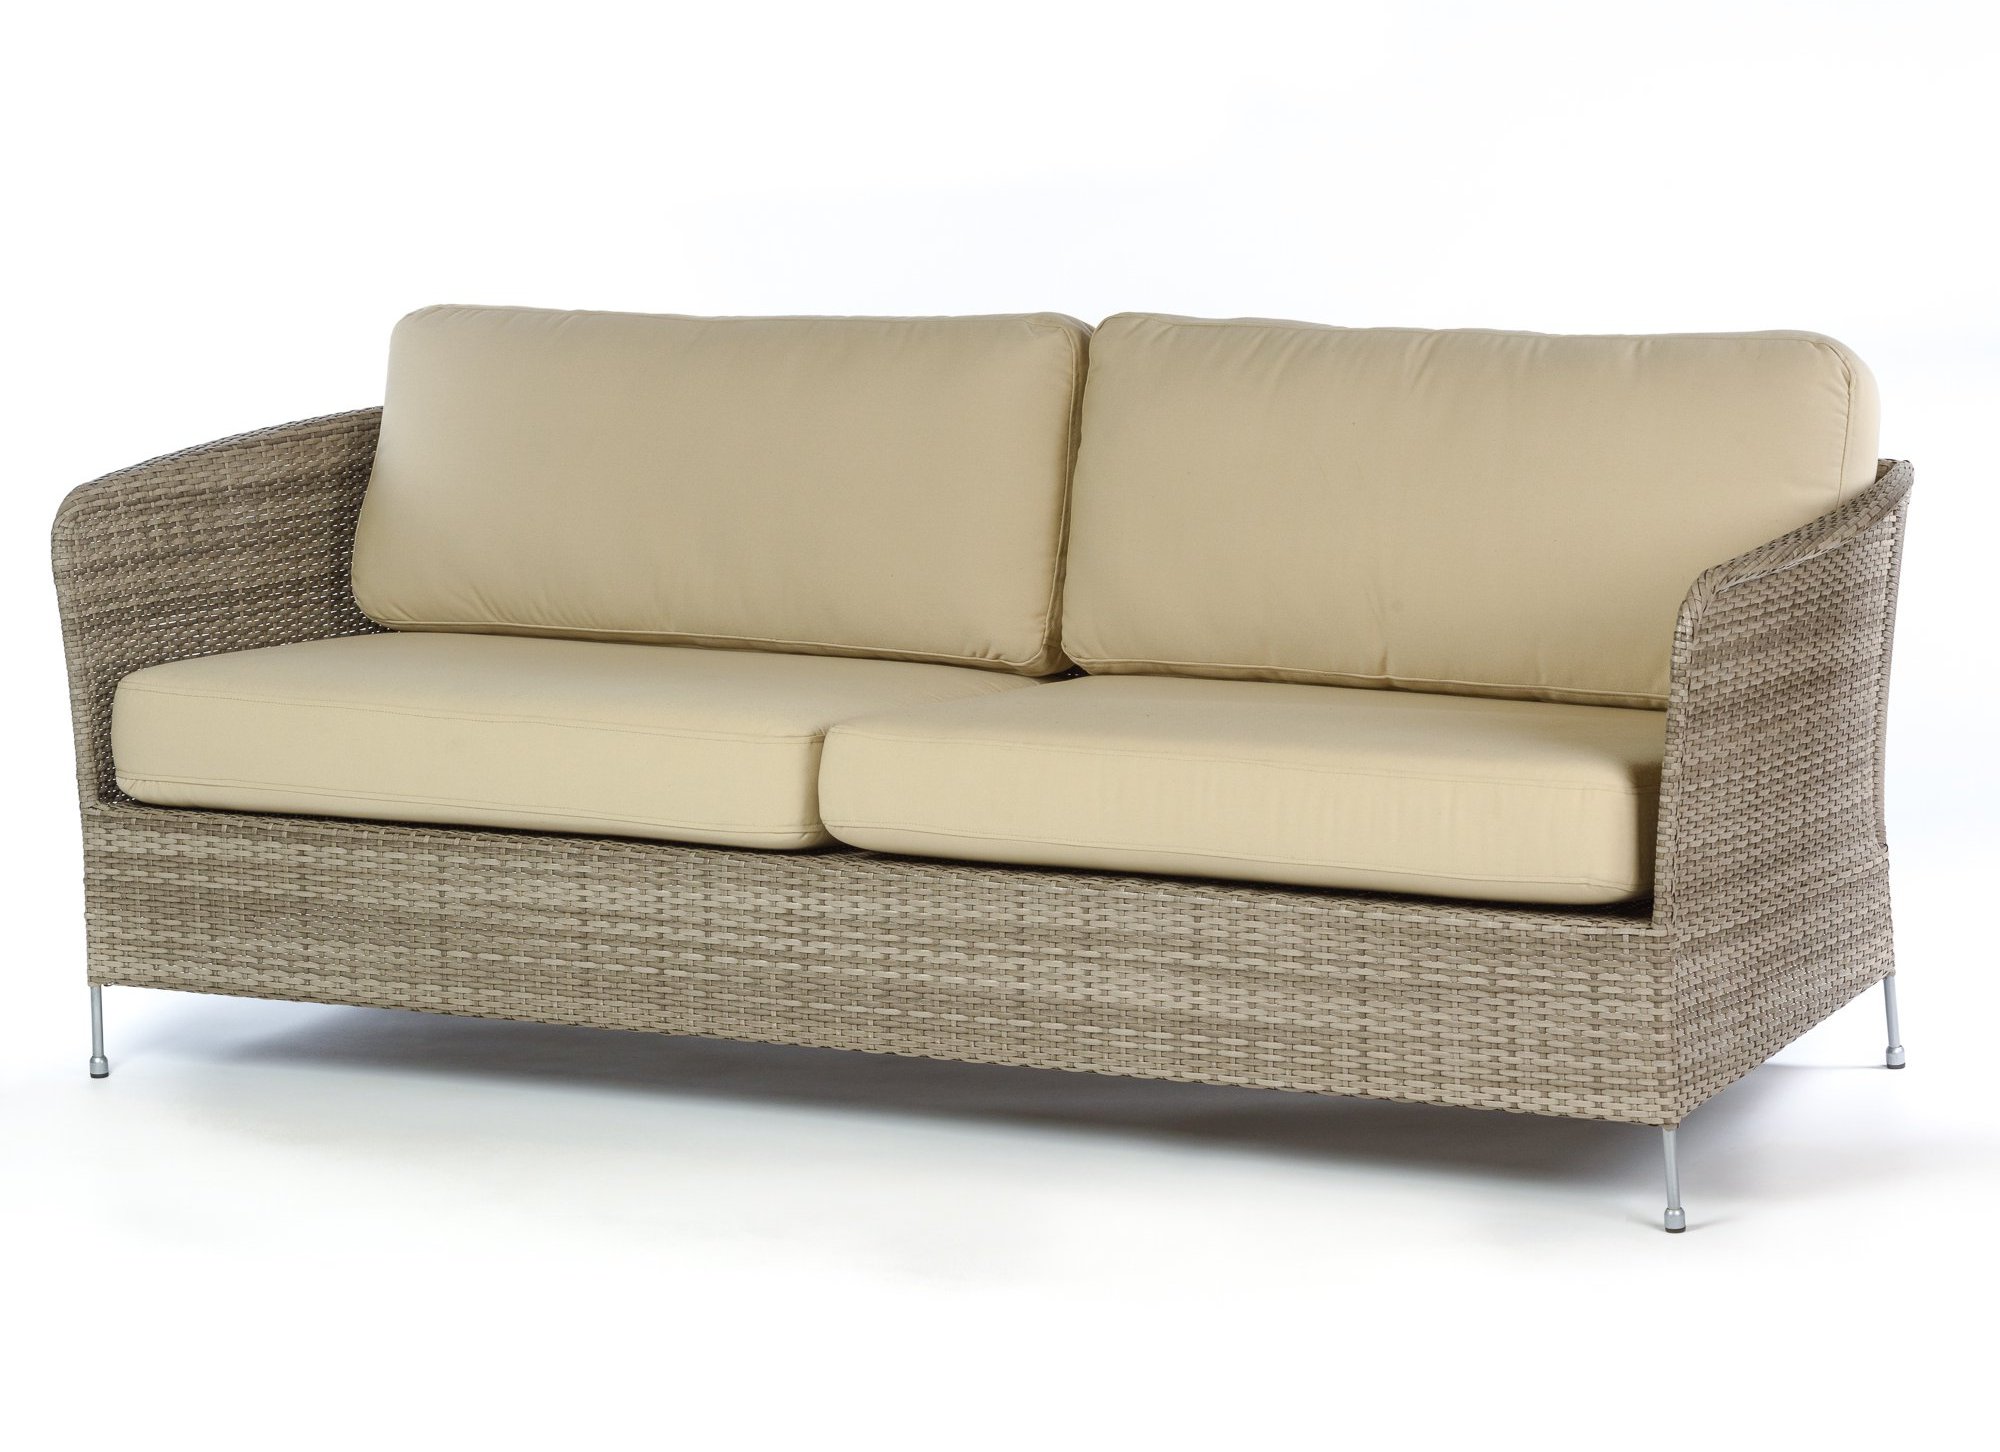 Replacement Cushions For Patio Furniture / Deep Seating Replacement